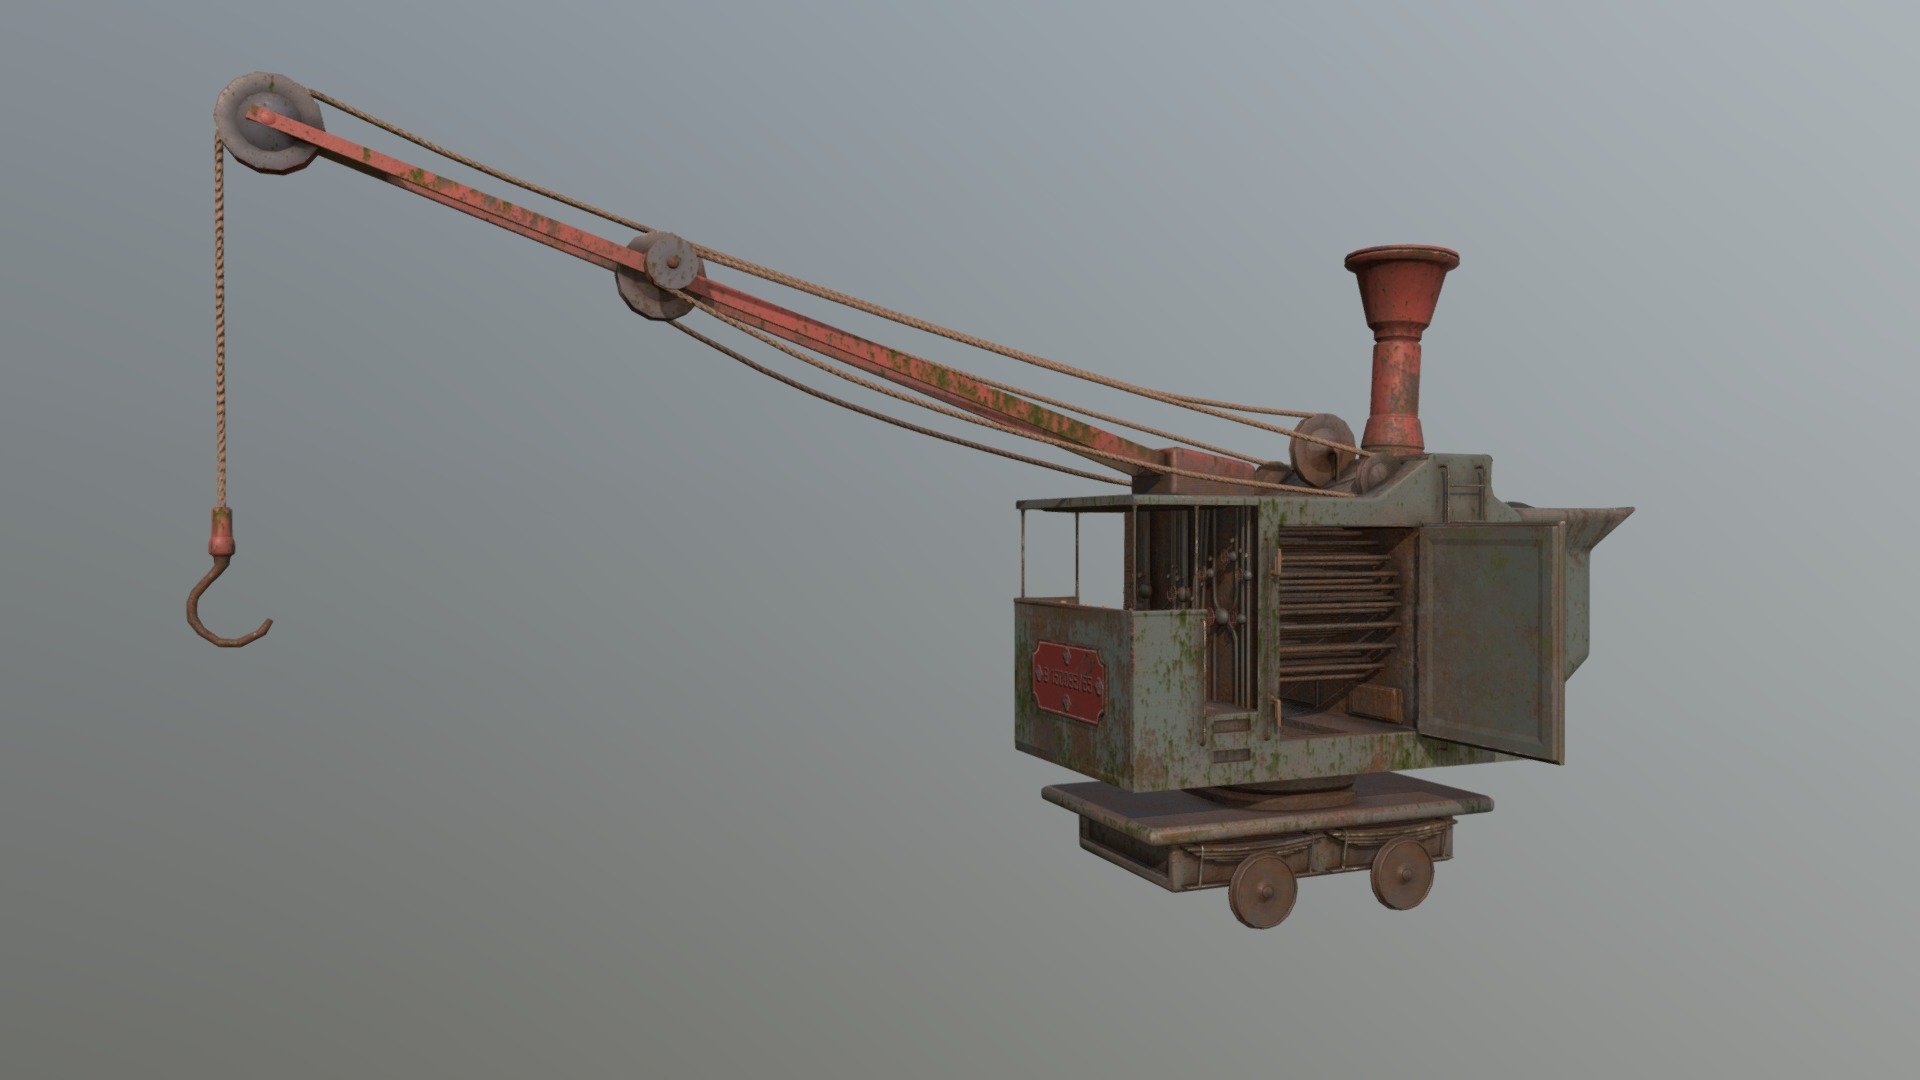 Steam crane old times 1910 asset

Unreal, unity engines ready
Origins wheels animation ready
Origins rotations ready
Origins doors animation ready
Blender 2.9 modeled
Substance painter original textures 2k res. 
Realstic scale asset and game ready.
Download includes:
2k &amp; 4k PBR textures
.blend file
.fbx - Steam crane old times 1910 - Buy Royalty Free 3D model by Thomas Binder (@bindertom61) 3d model